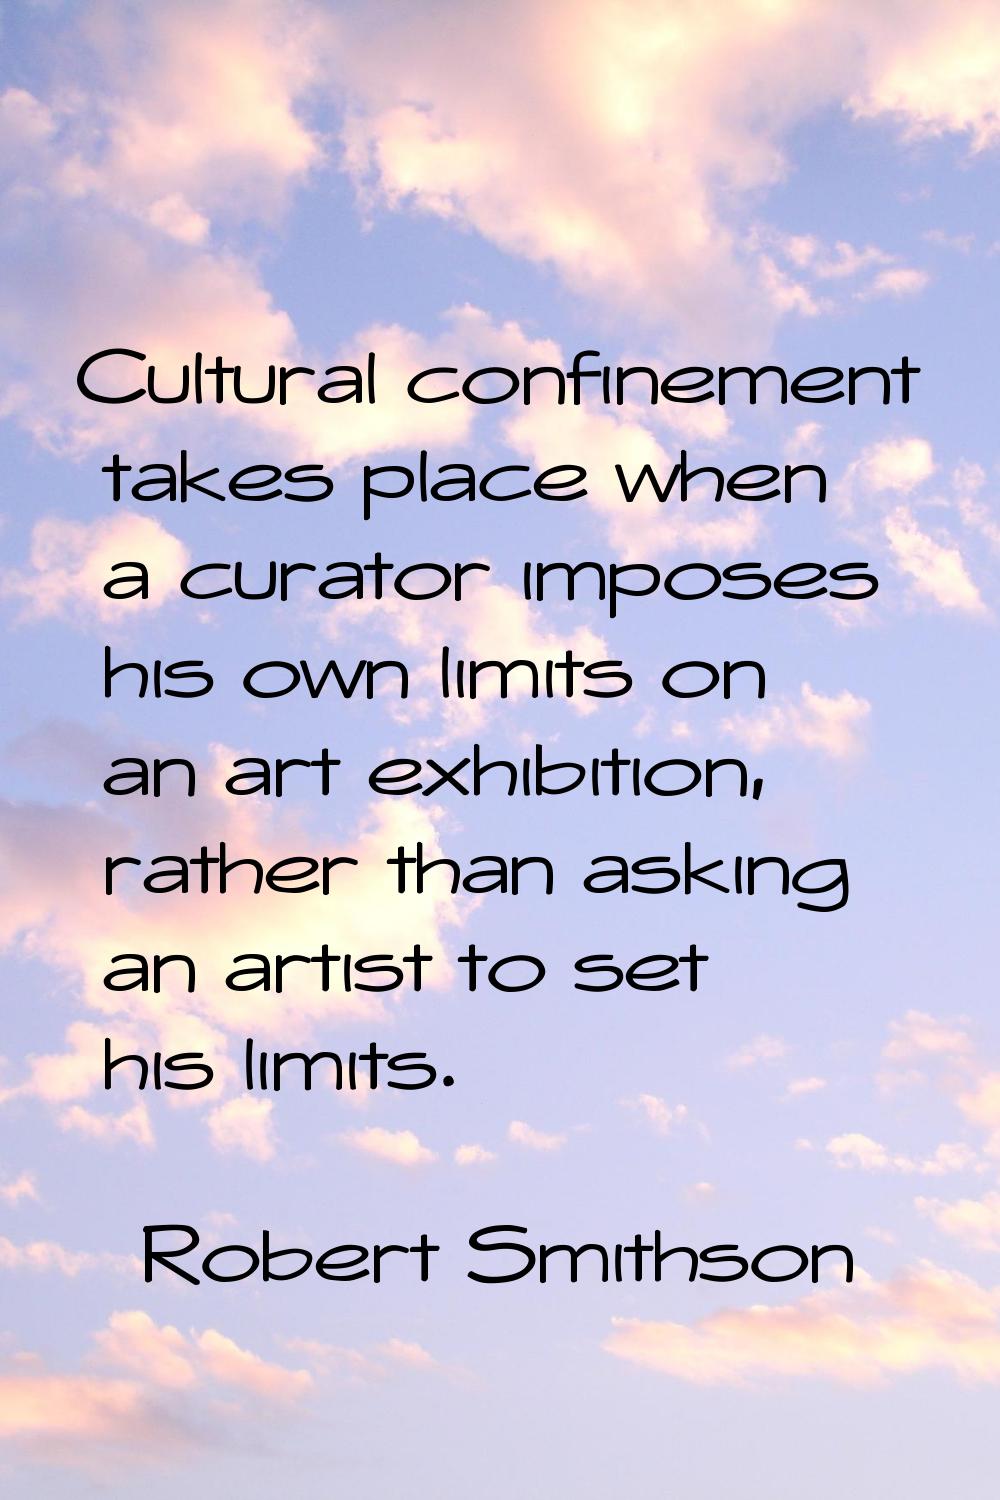 Cultural confinement takes place when a curator imposes his own limits on an art exhibition, rather